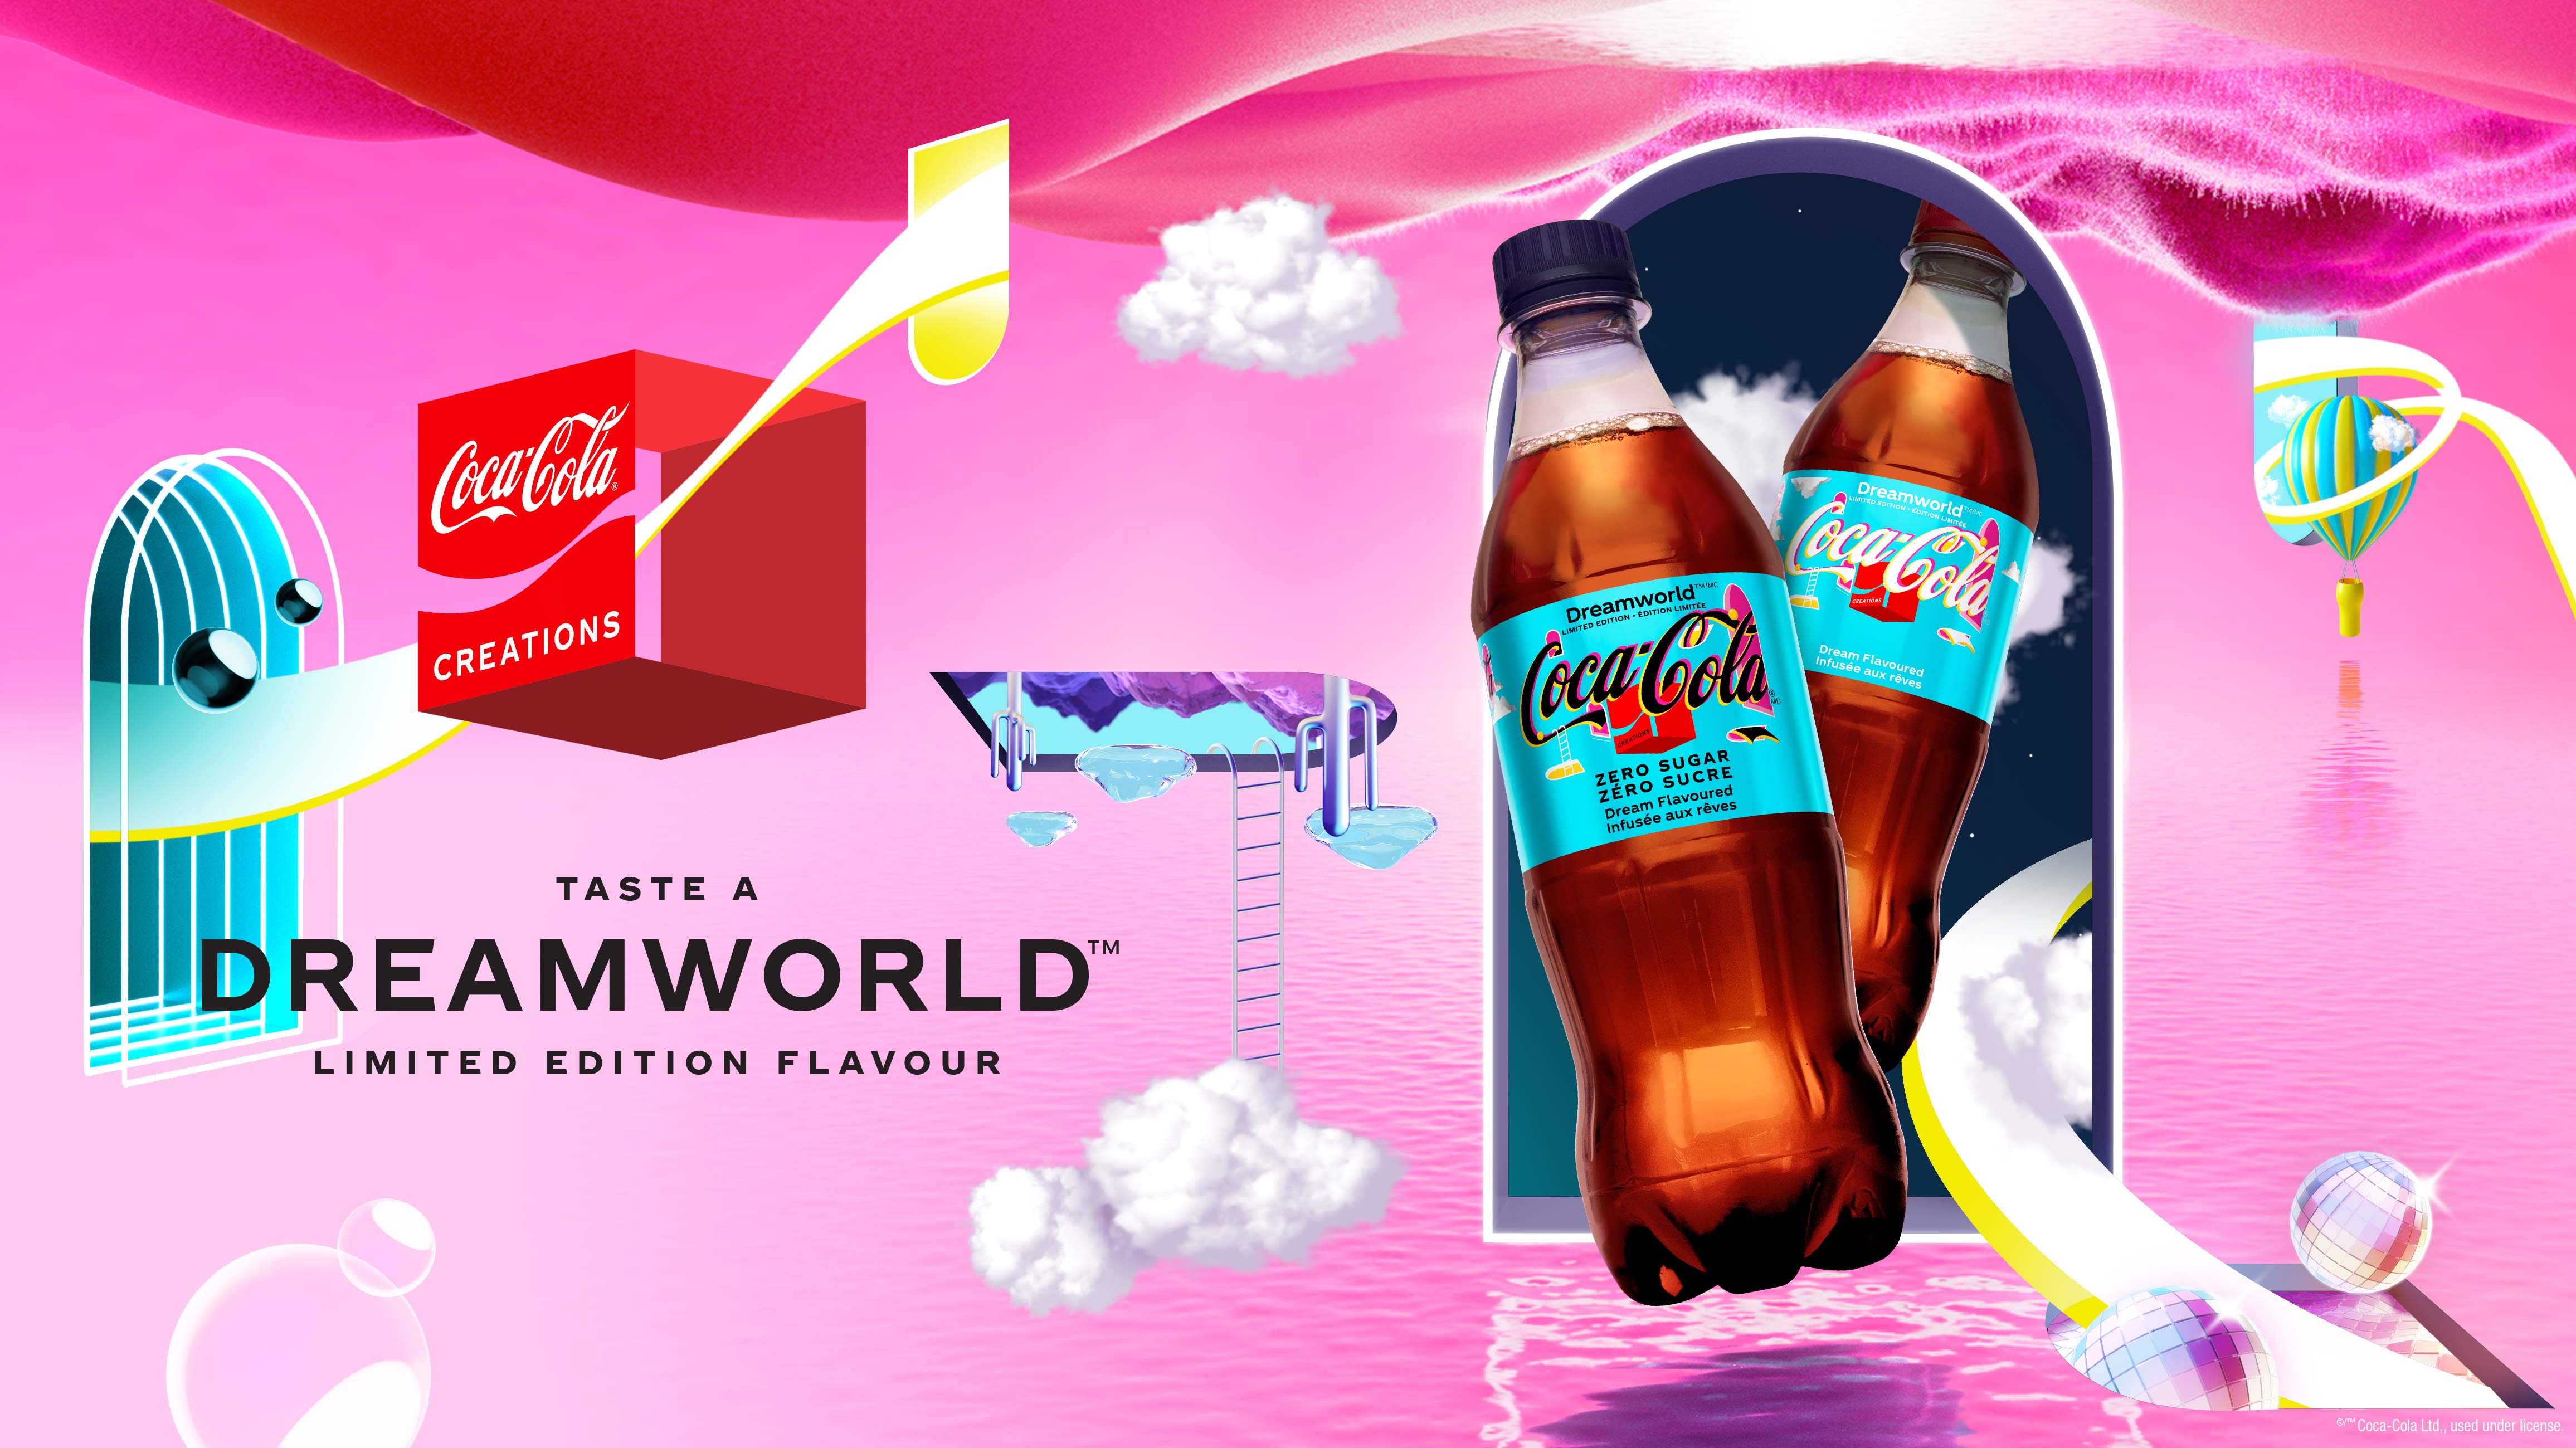 CocaCola Creations Launches FantasyInspired CocaCola Dreamworld